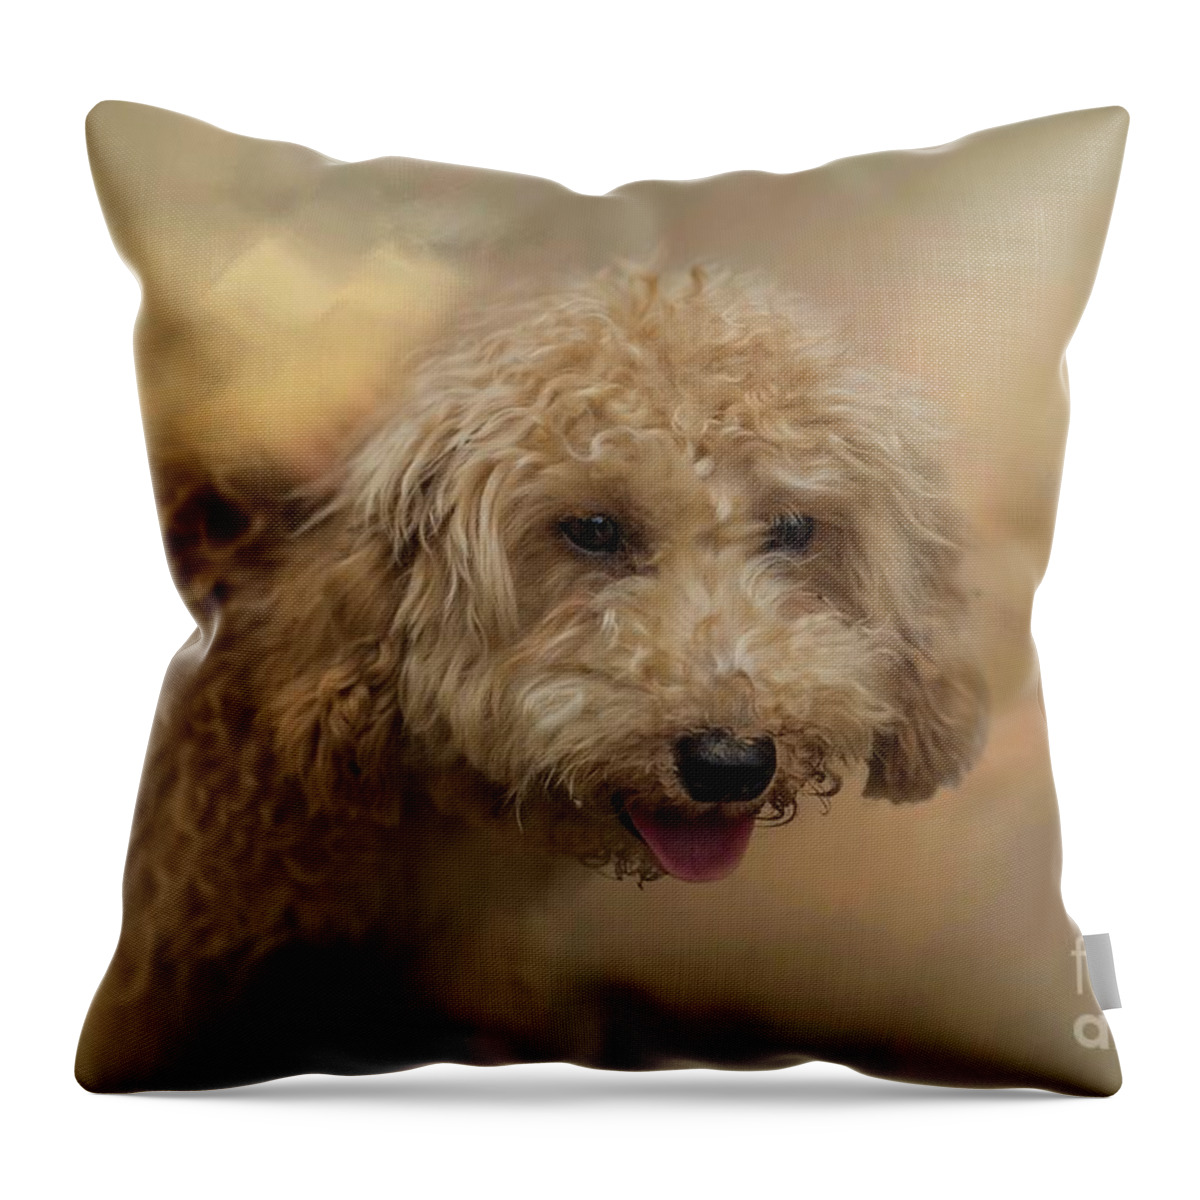 Cockapoo Throw Pillow featuring the mixed media Cockapoo Portrait by Eva Lechner